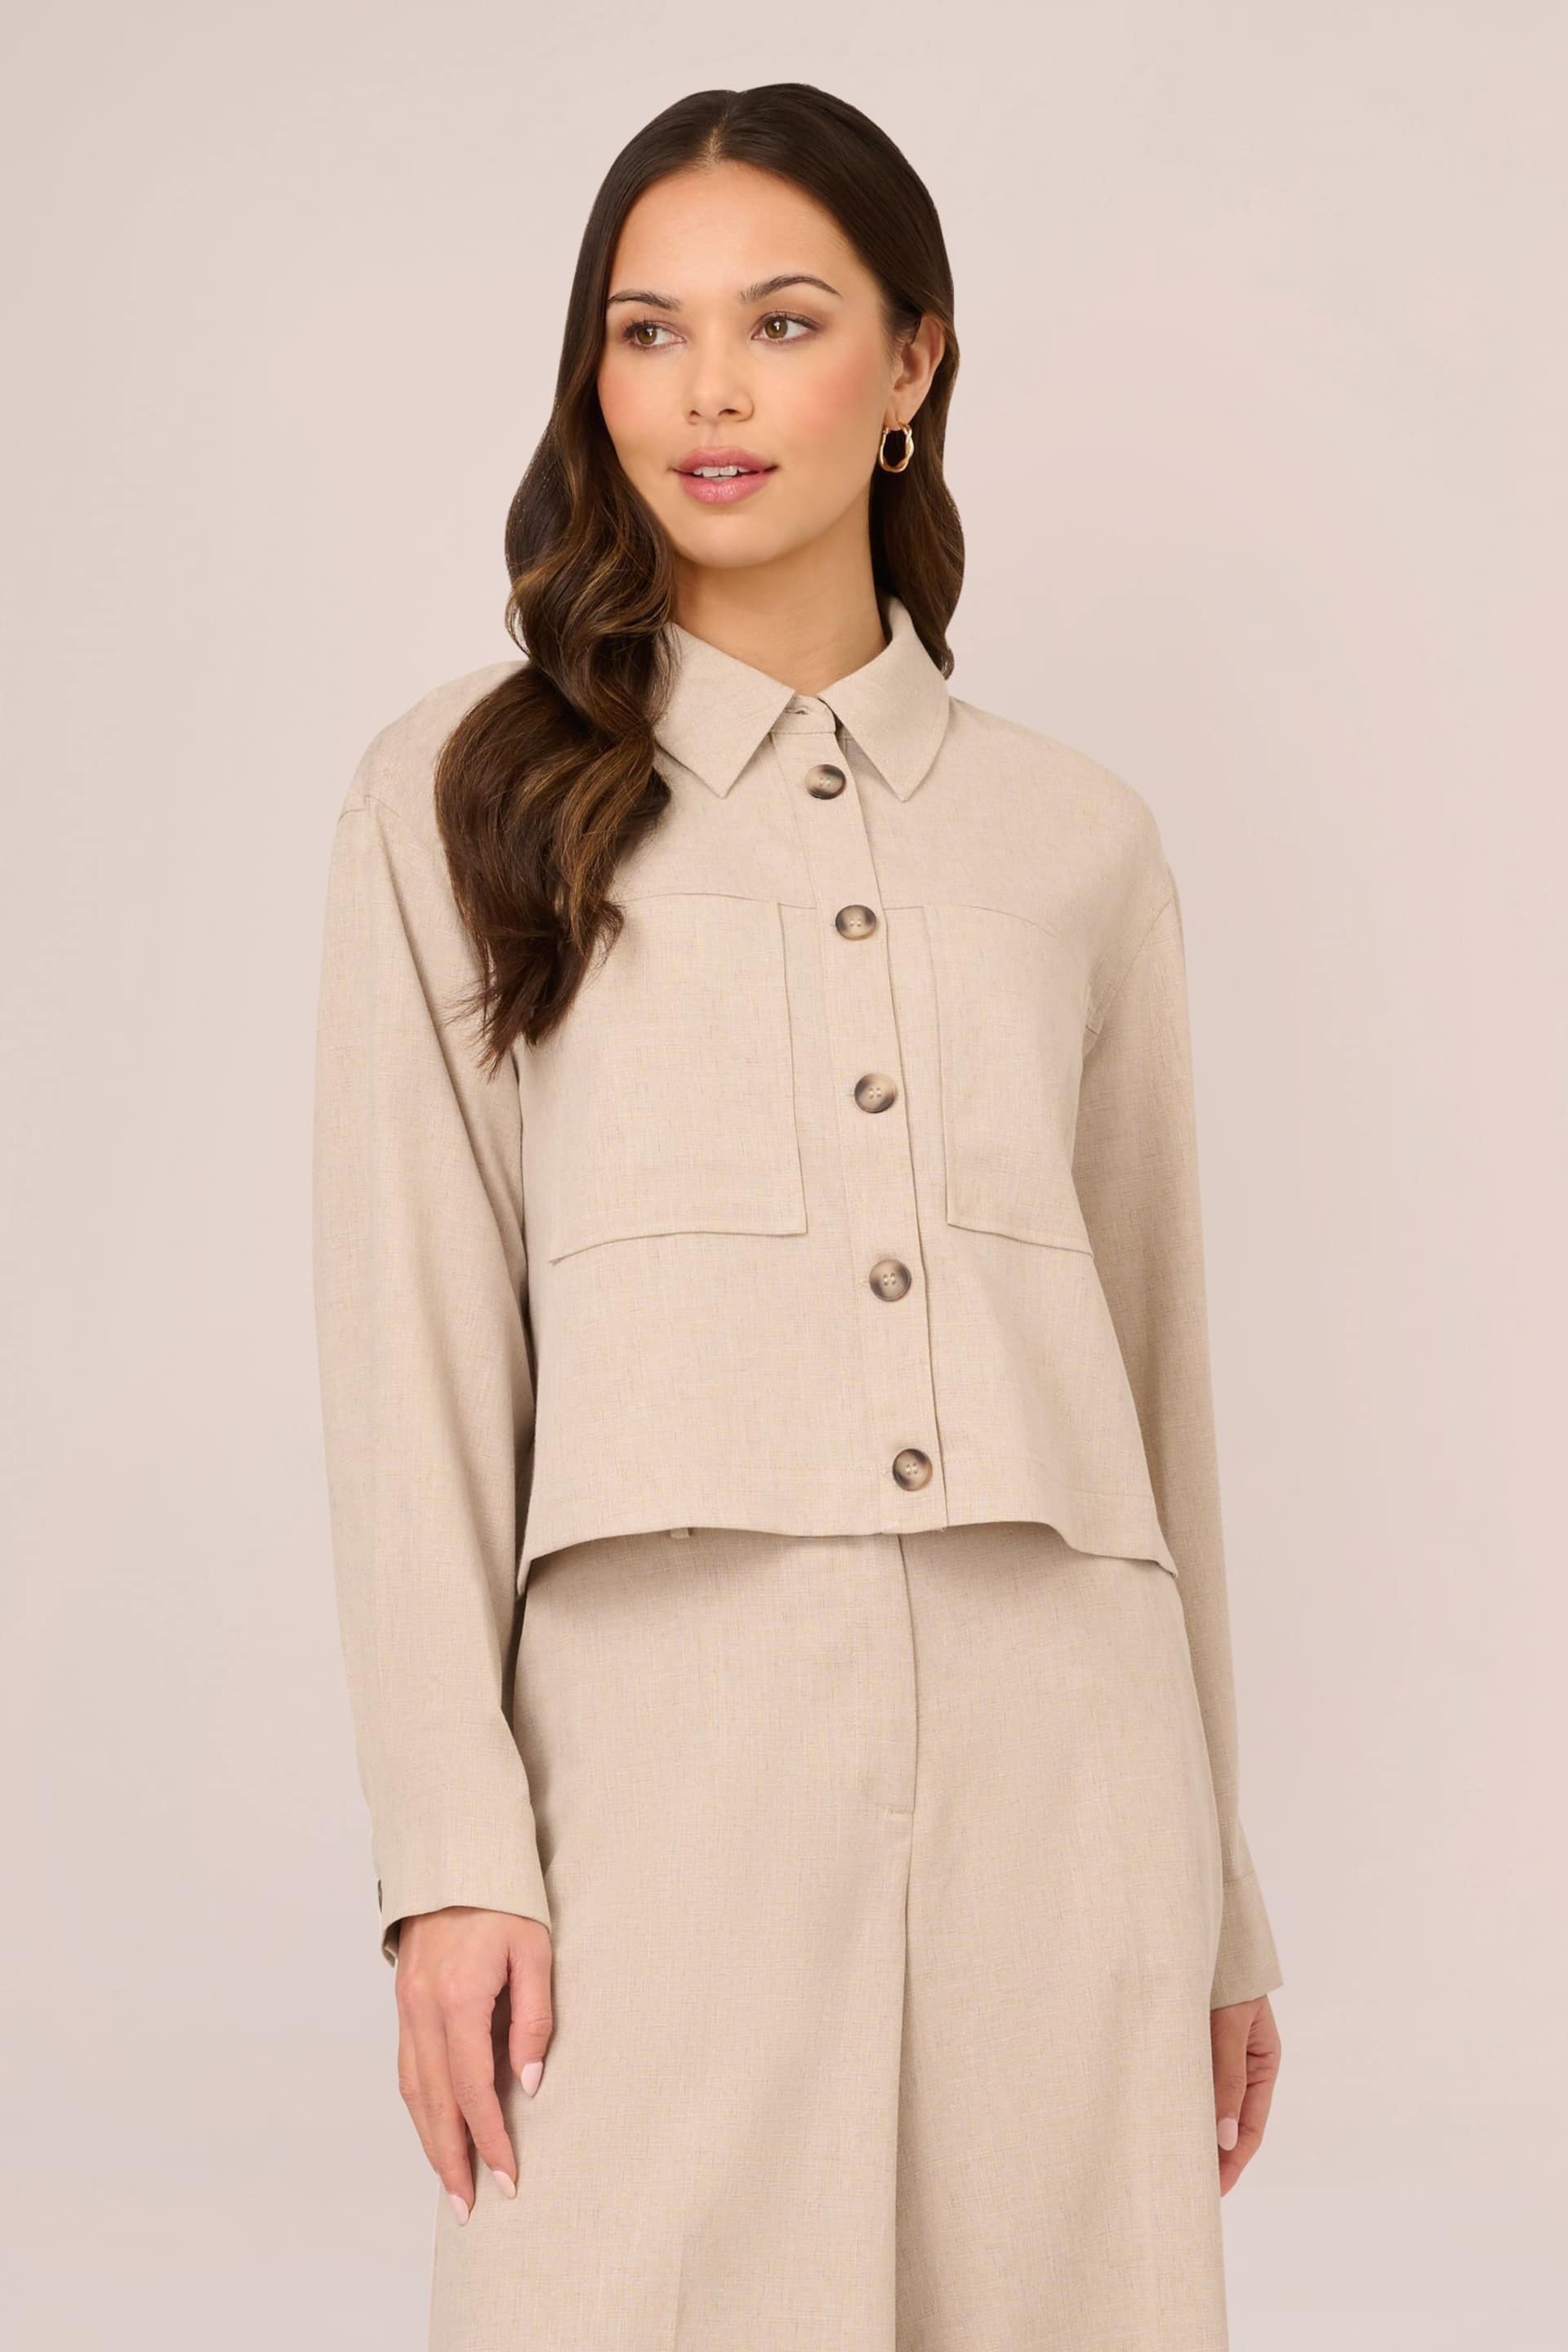 Adrianna Papell Natural Solid Long Sleeve Button Up Utility Unlined Jacket - Image 1 of 7